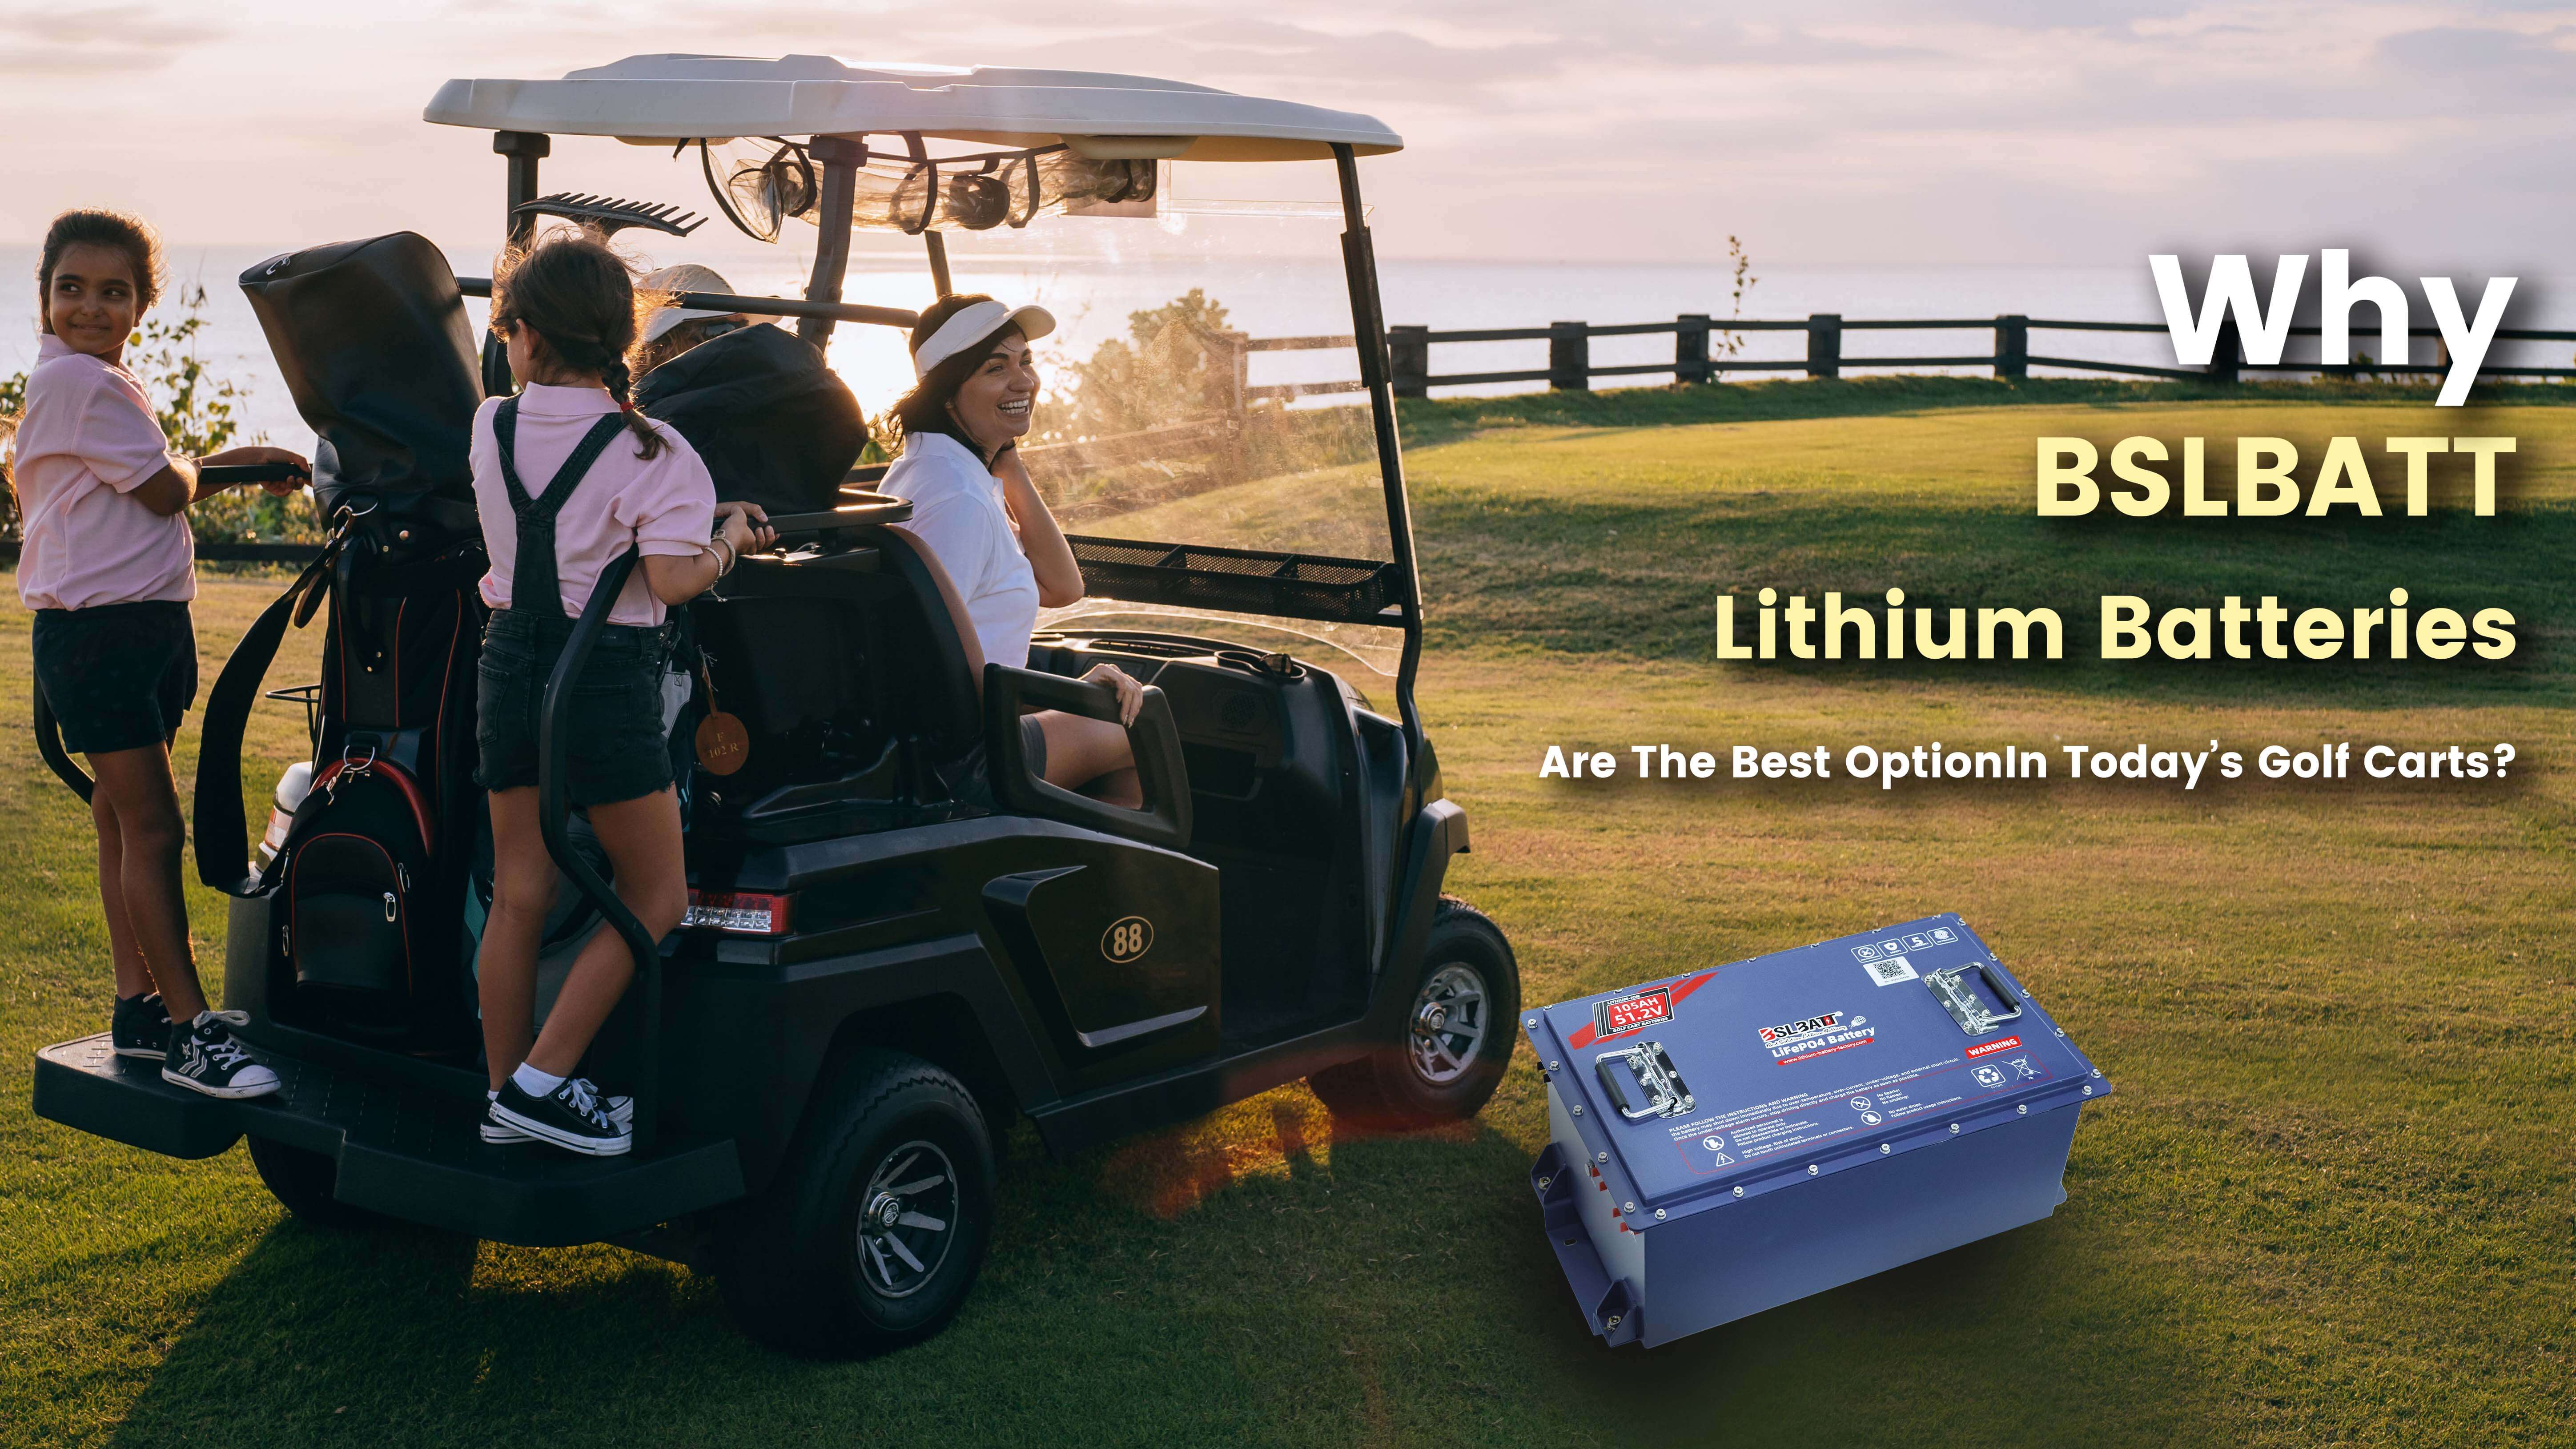 Why BSLBATT Lithium Batteries are the best option in today’s golf carts？